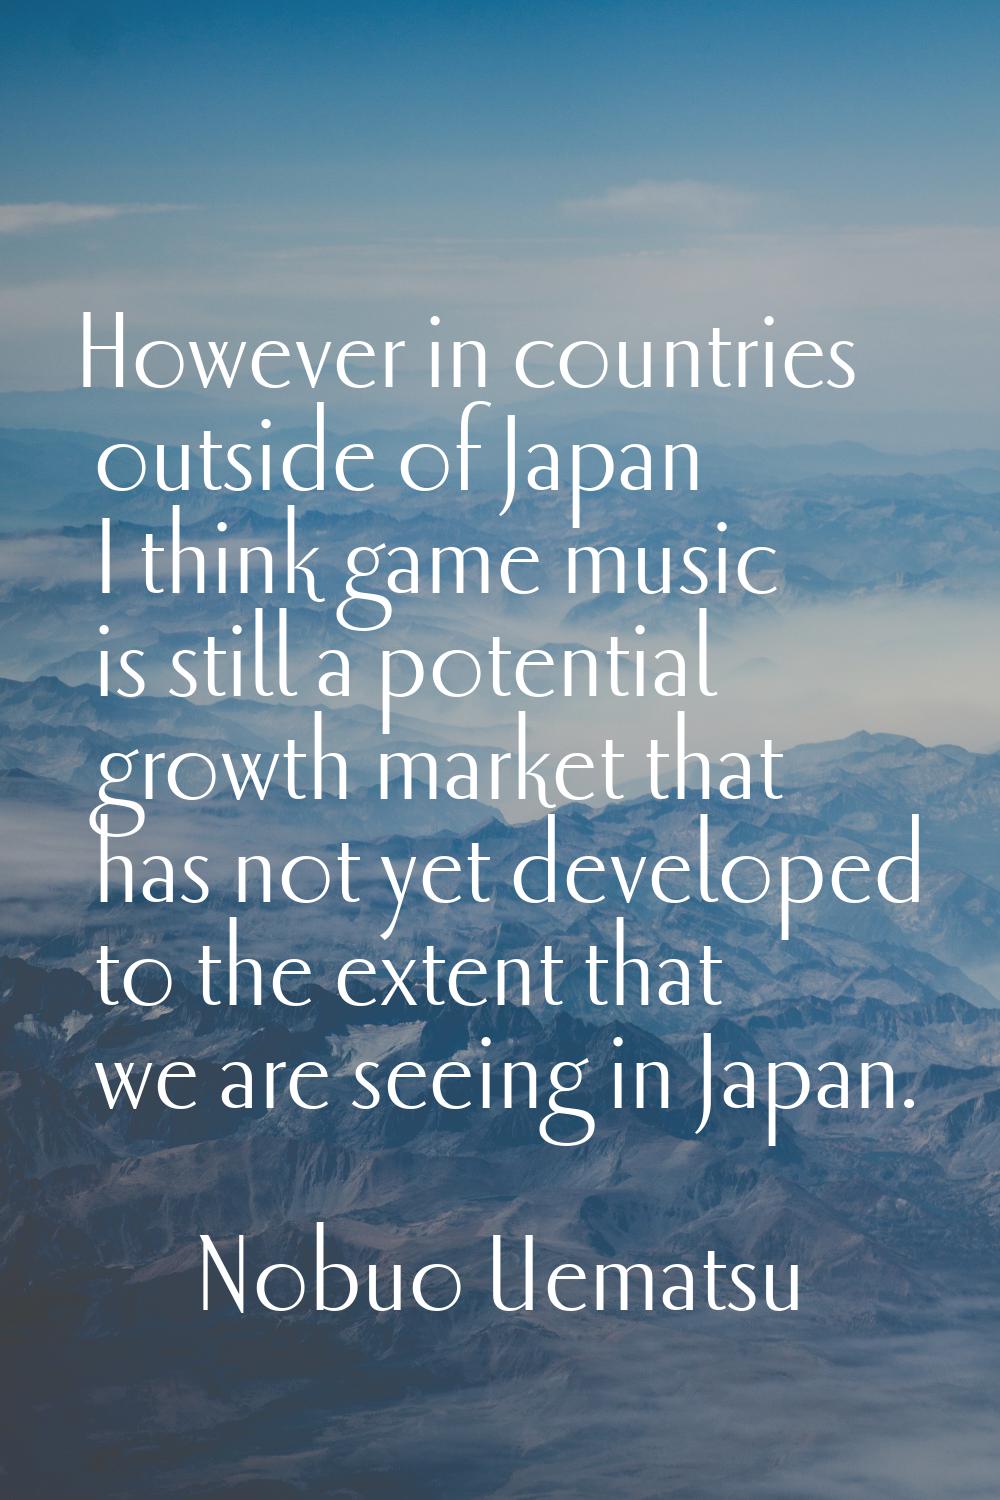 However in countries outside of Japan I think game music is still a potential growth market that ha